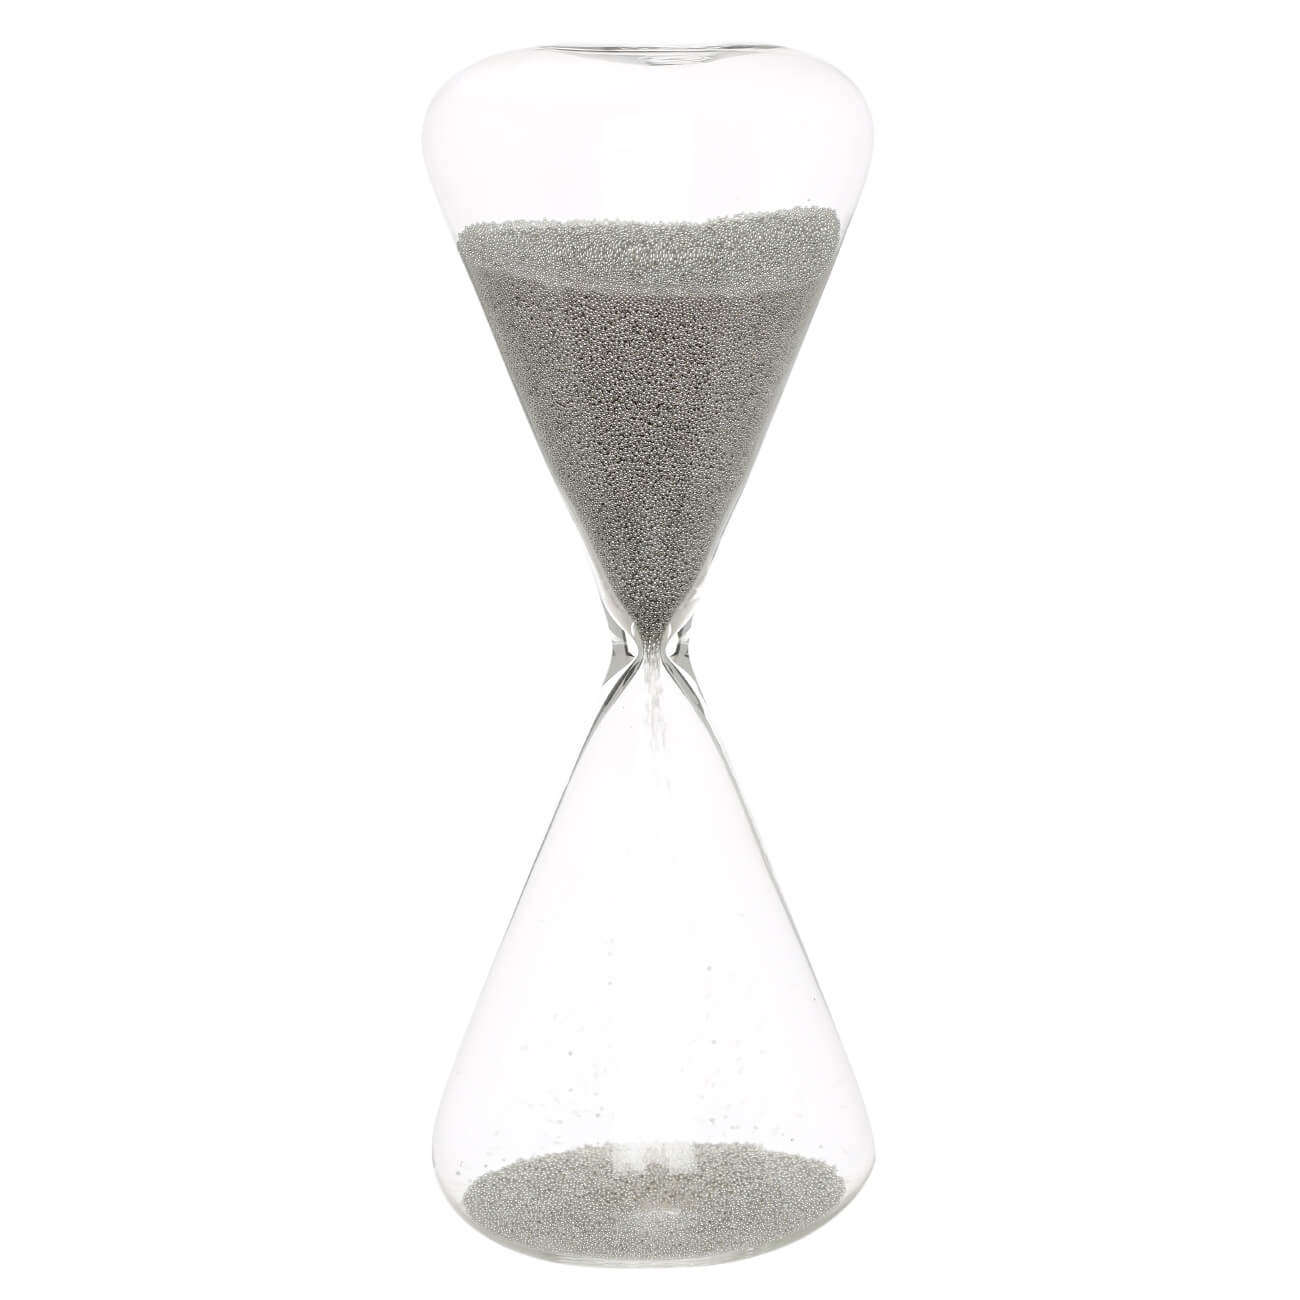 Hourglass, 16 cm, 2 minutes, with sequins inside, glass / sequins, silver, Actress изображение № 1